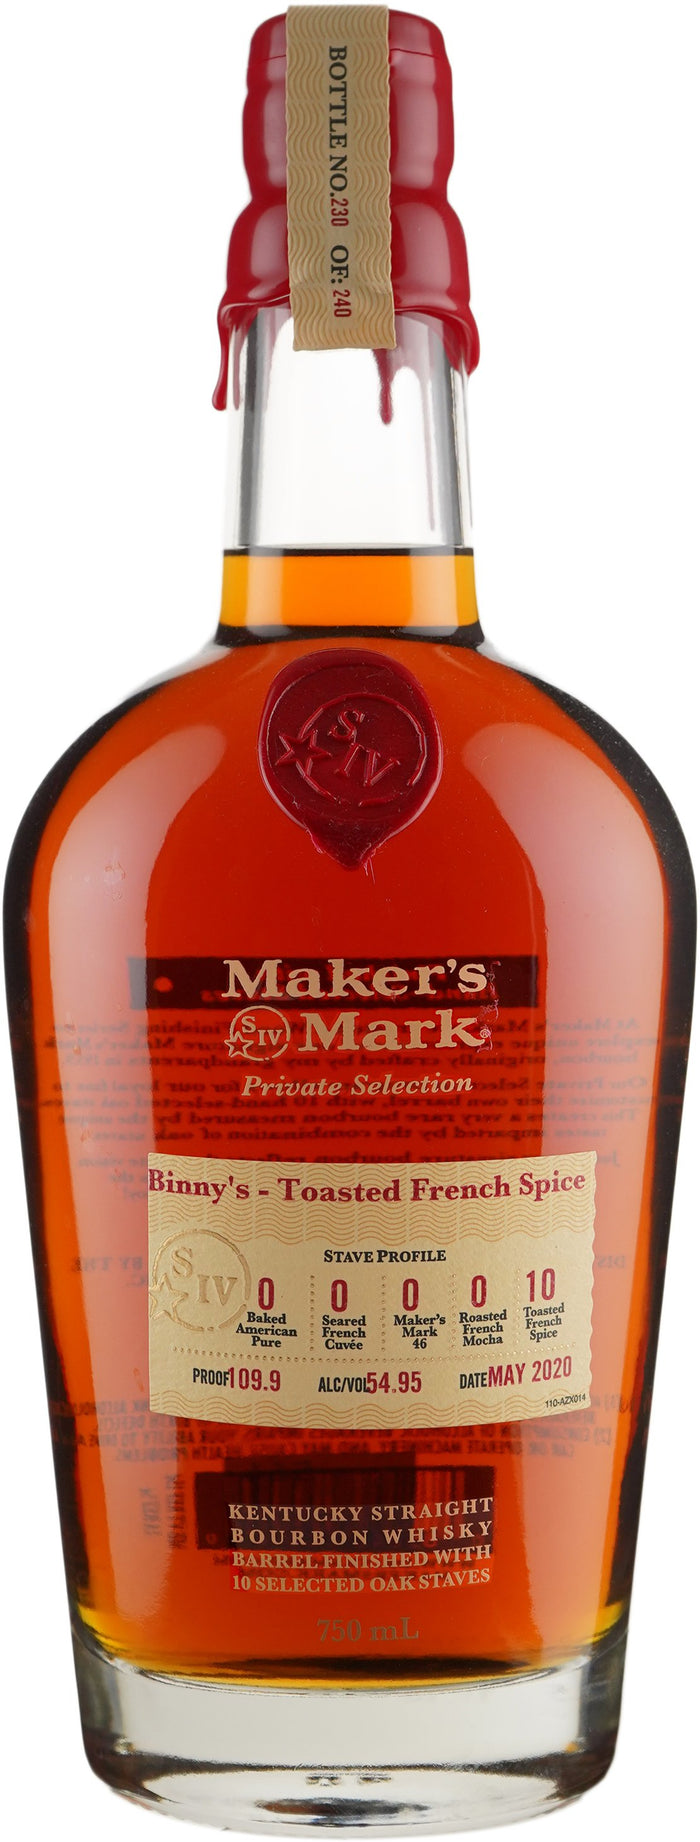 Maker's Mark Private Select Toasted French Spice Single Stave Barrel # 8471 Bourbon Whisky